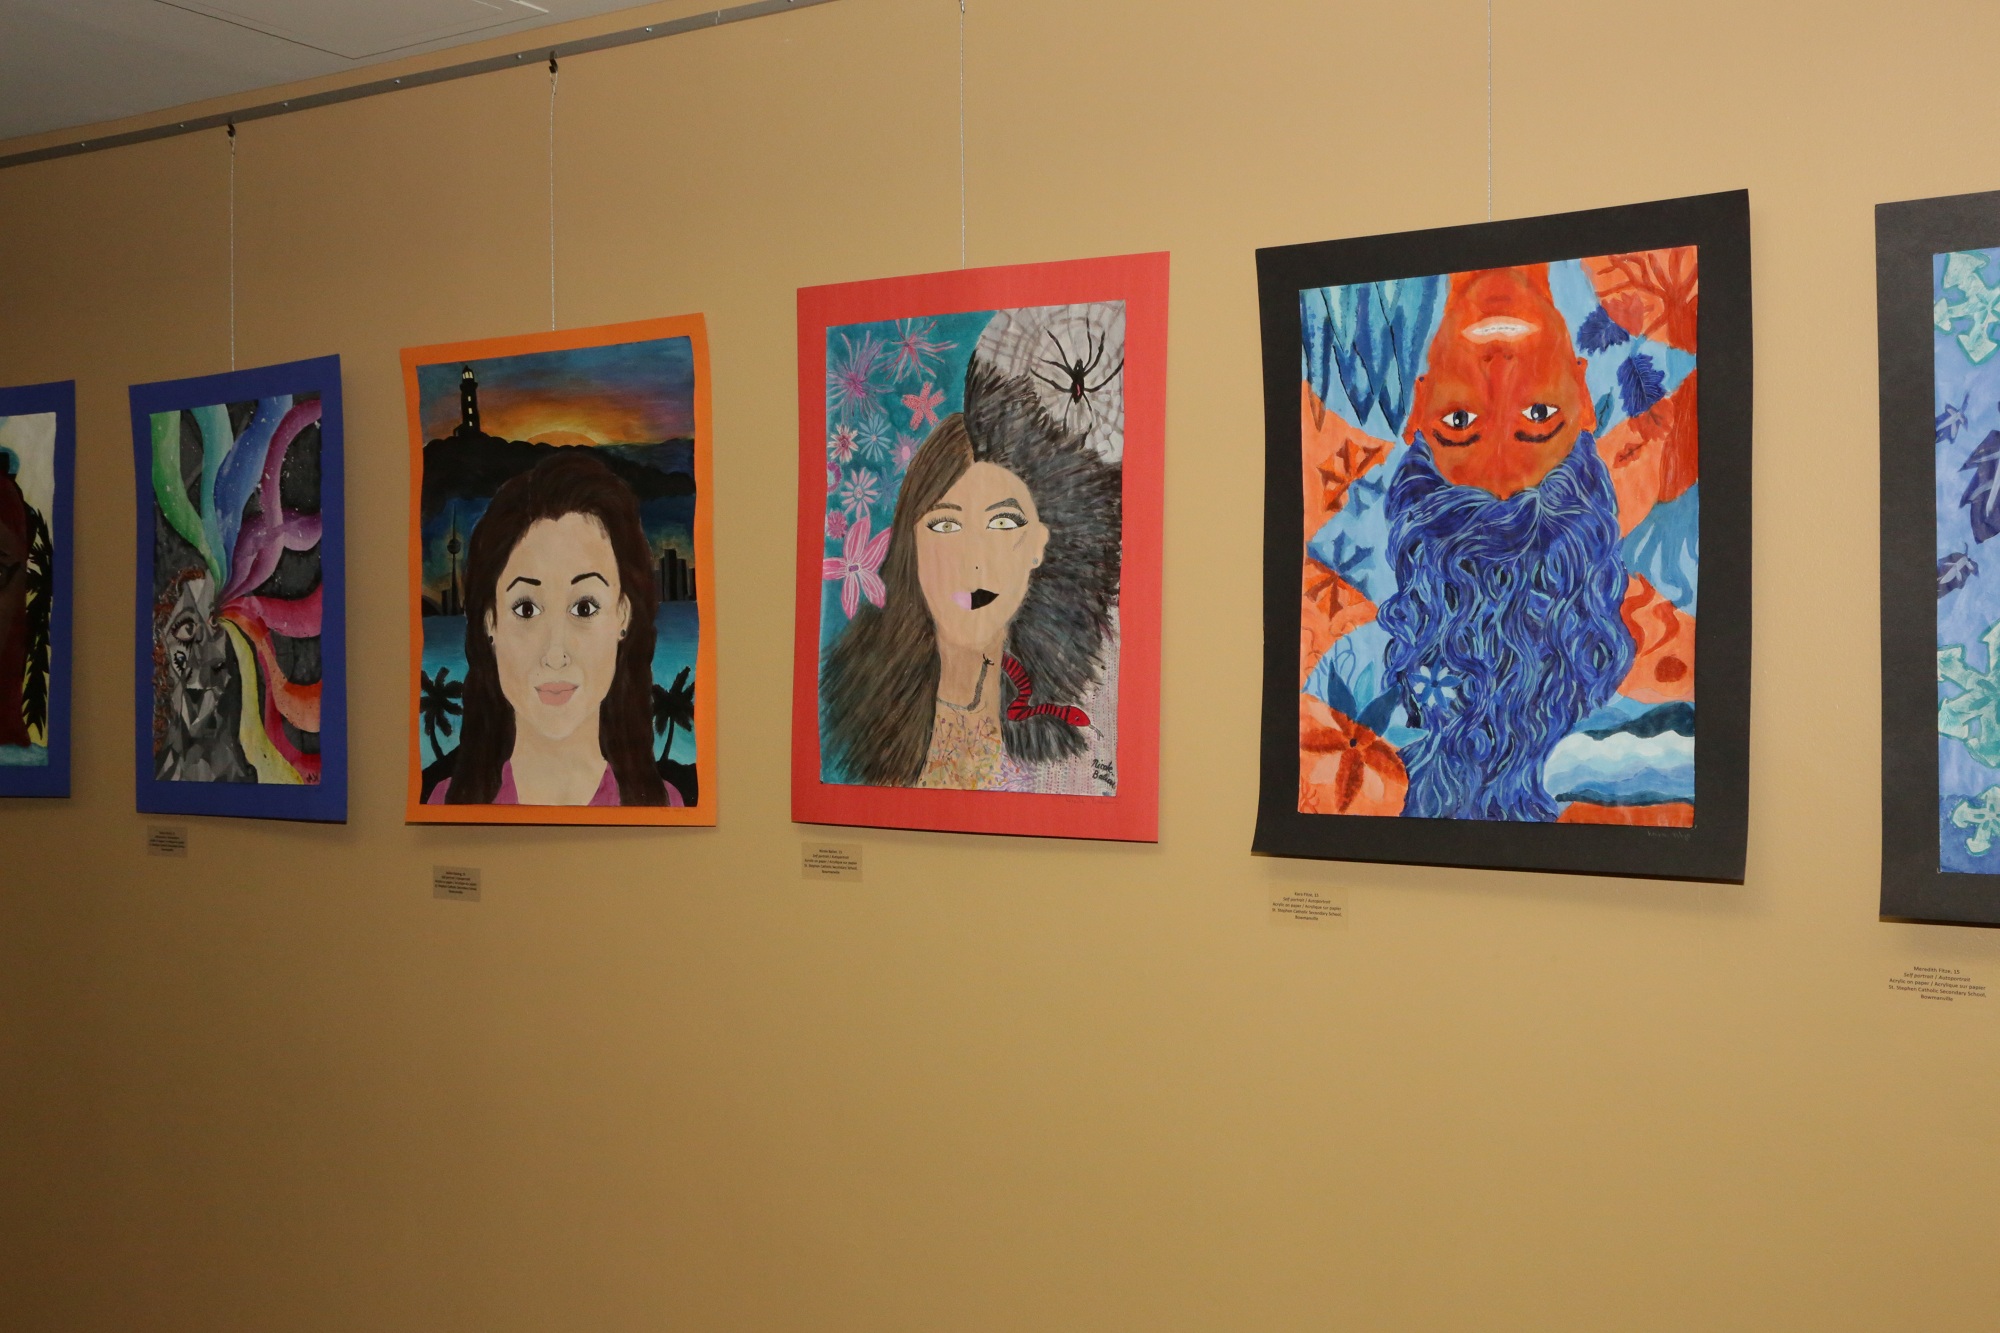 Drawings by student artists in the 2013 Youth Arts Program.